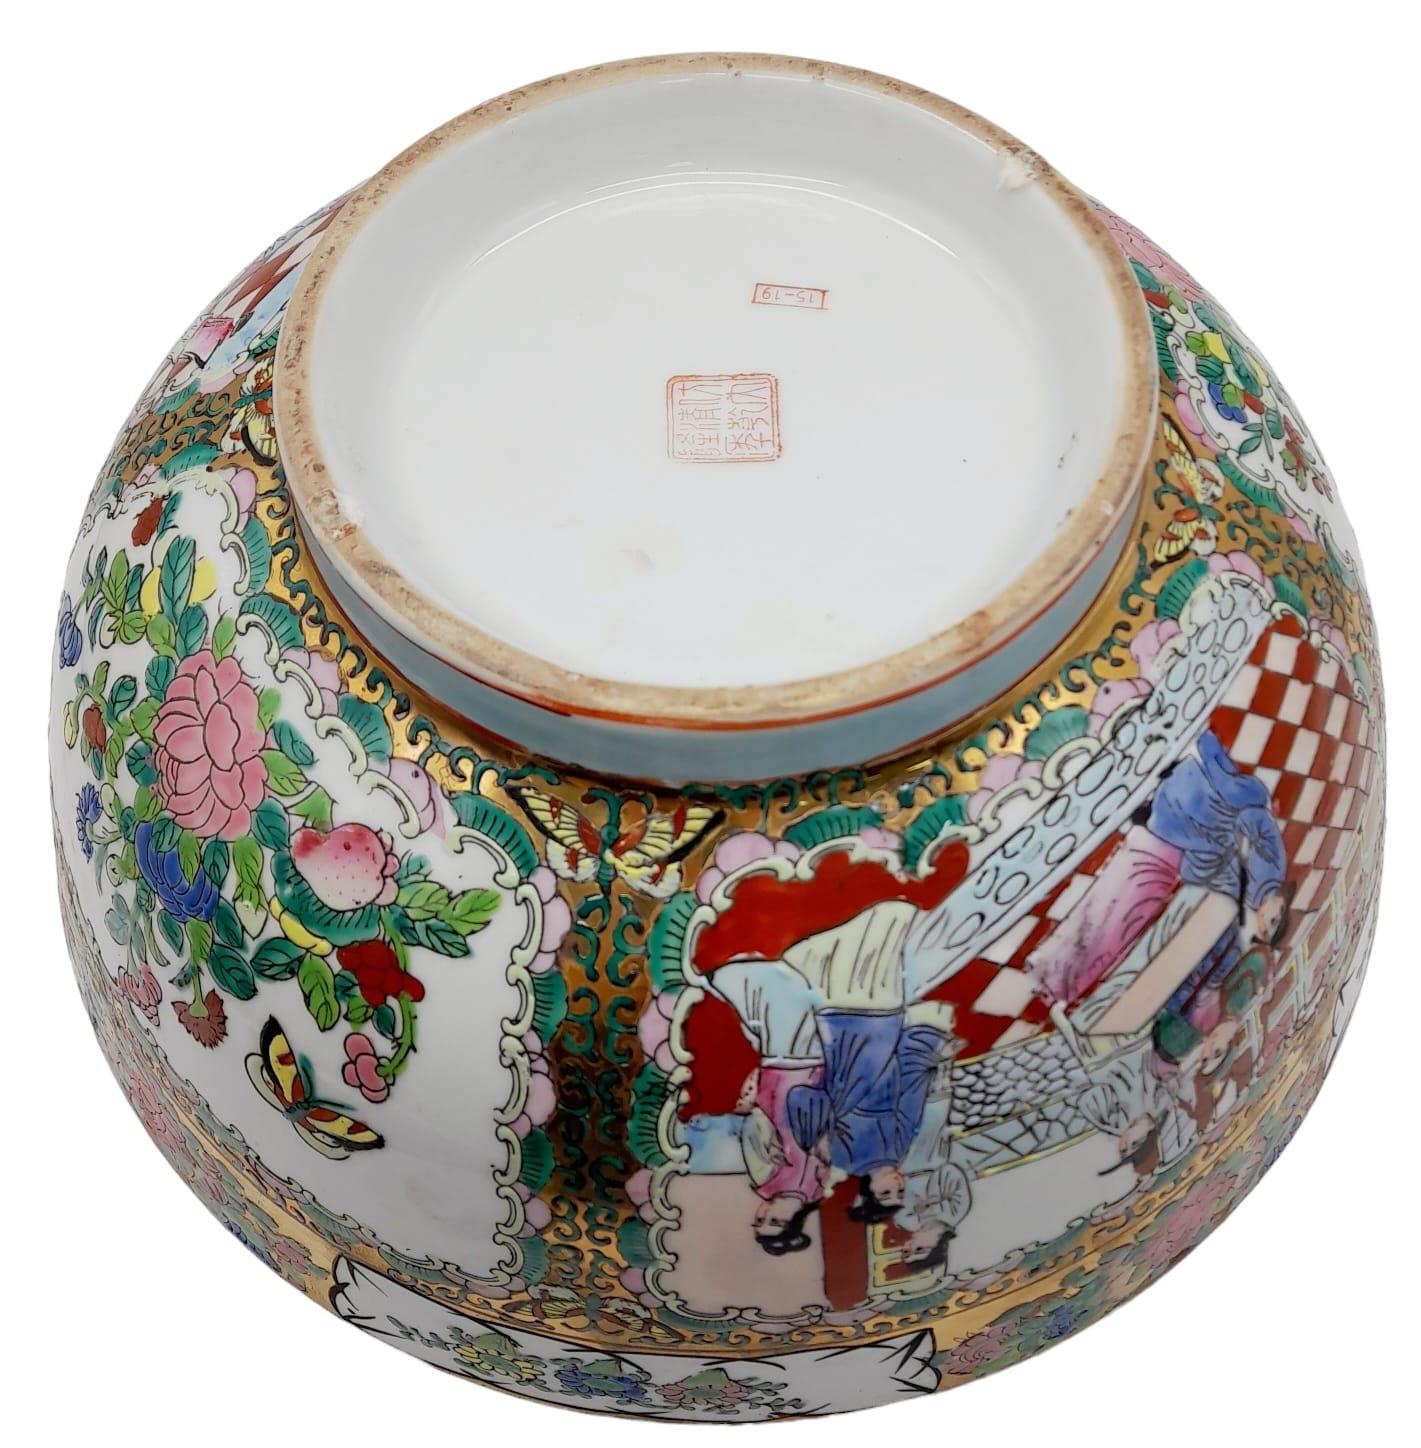 A Very Large Antique Chinese Famille Rose Bowl. Beautiful colours depicting court scenes amongst - Image 6 of 7